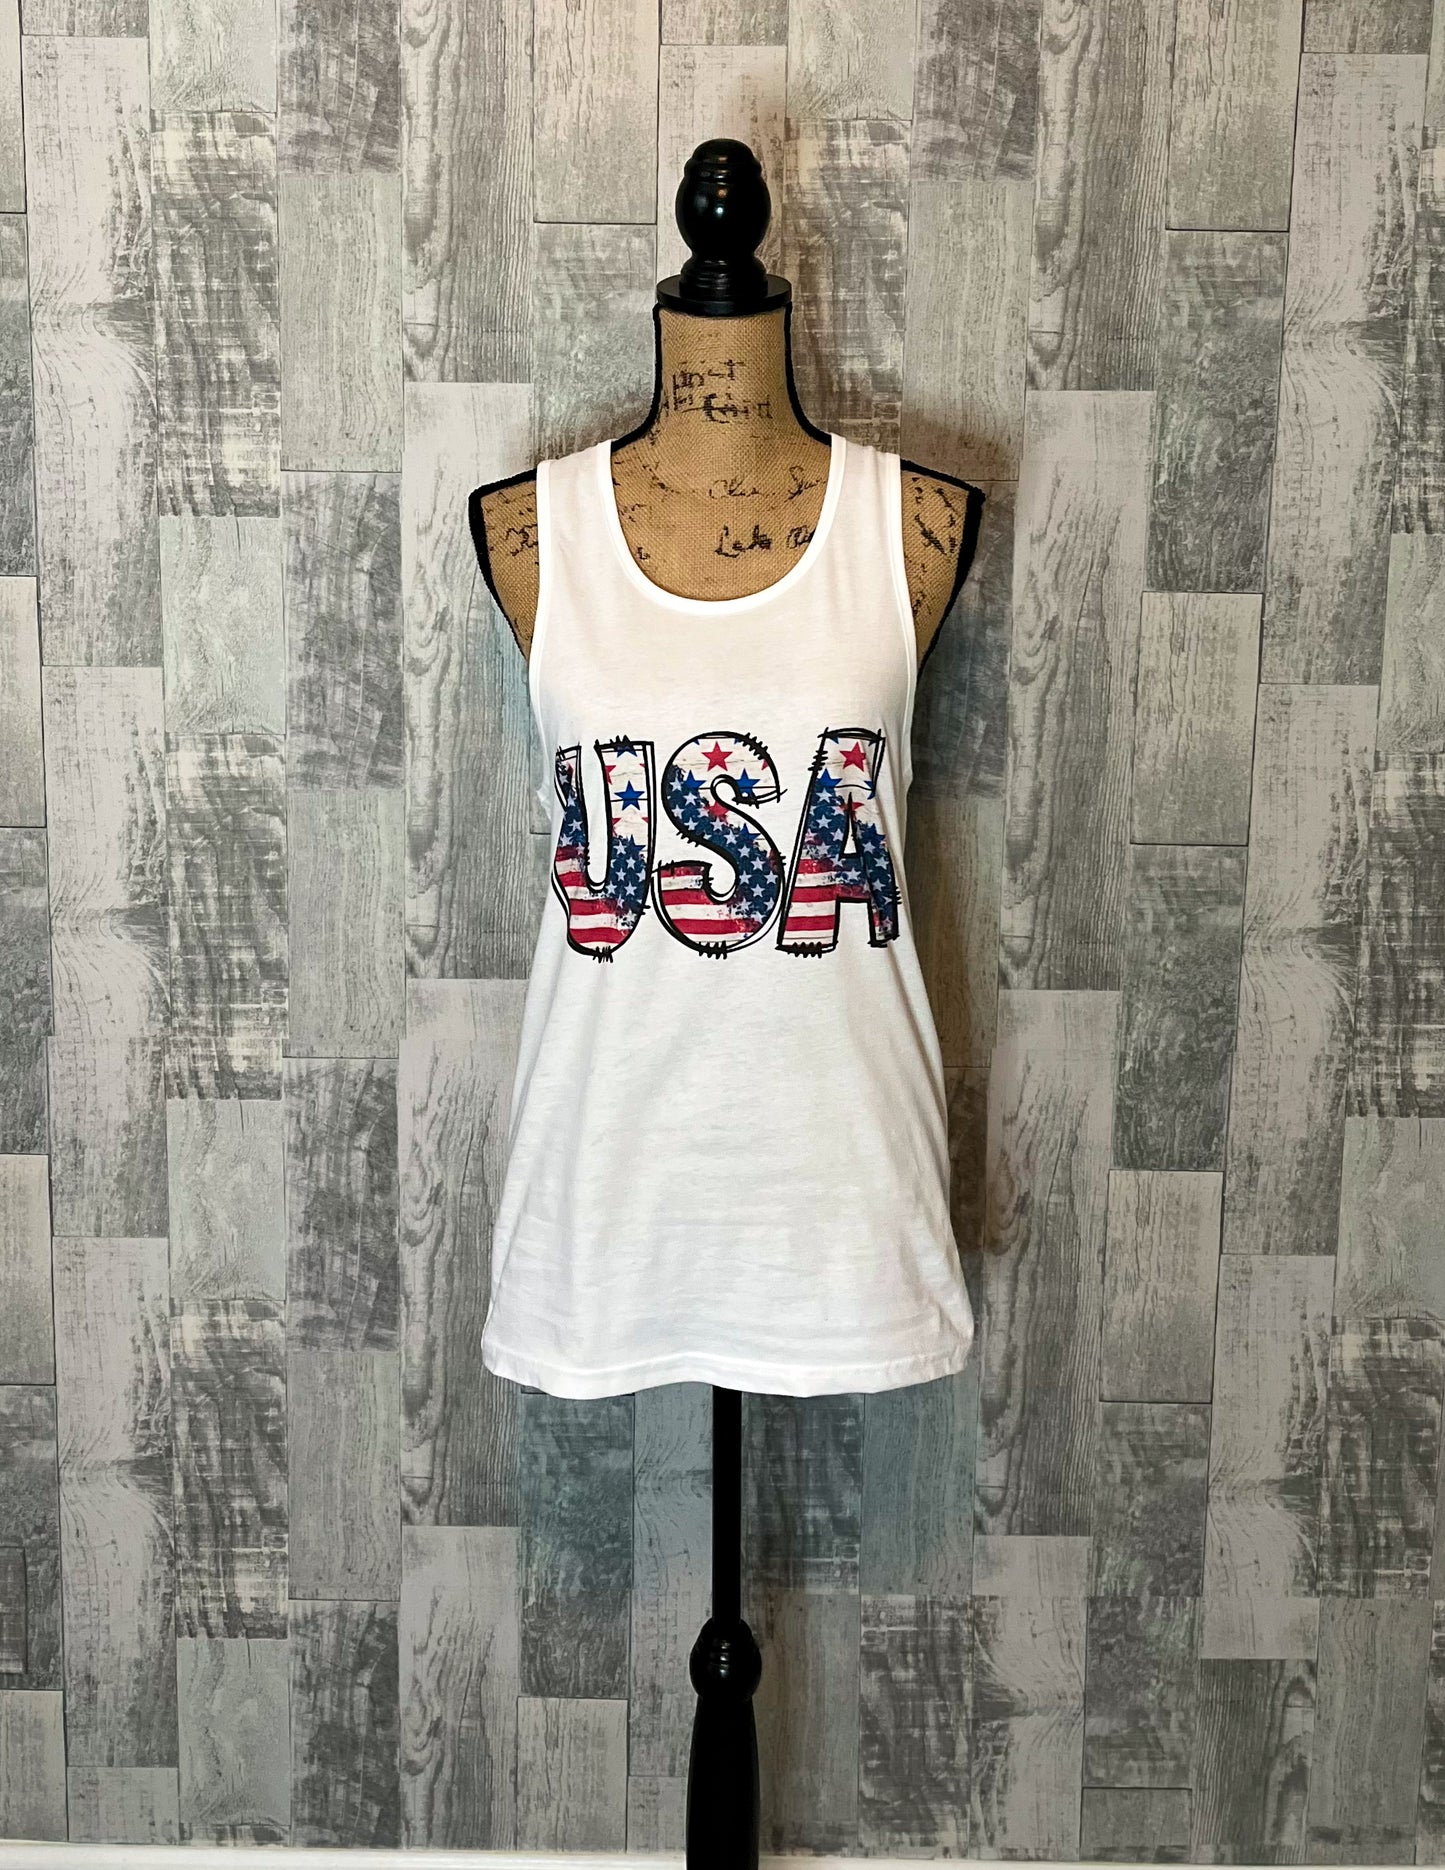 Shirts & Tops clothing, Graphic Tees, next level tee, patriotic, patriotic graphic tees, shirts, shirts & tops Size: Small, Medium, Large, Extra Large, XXL